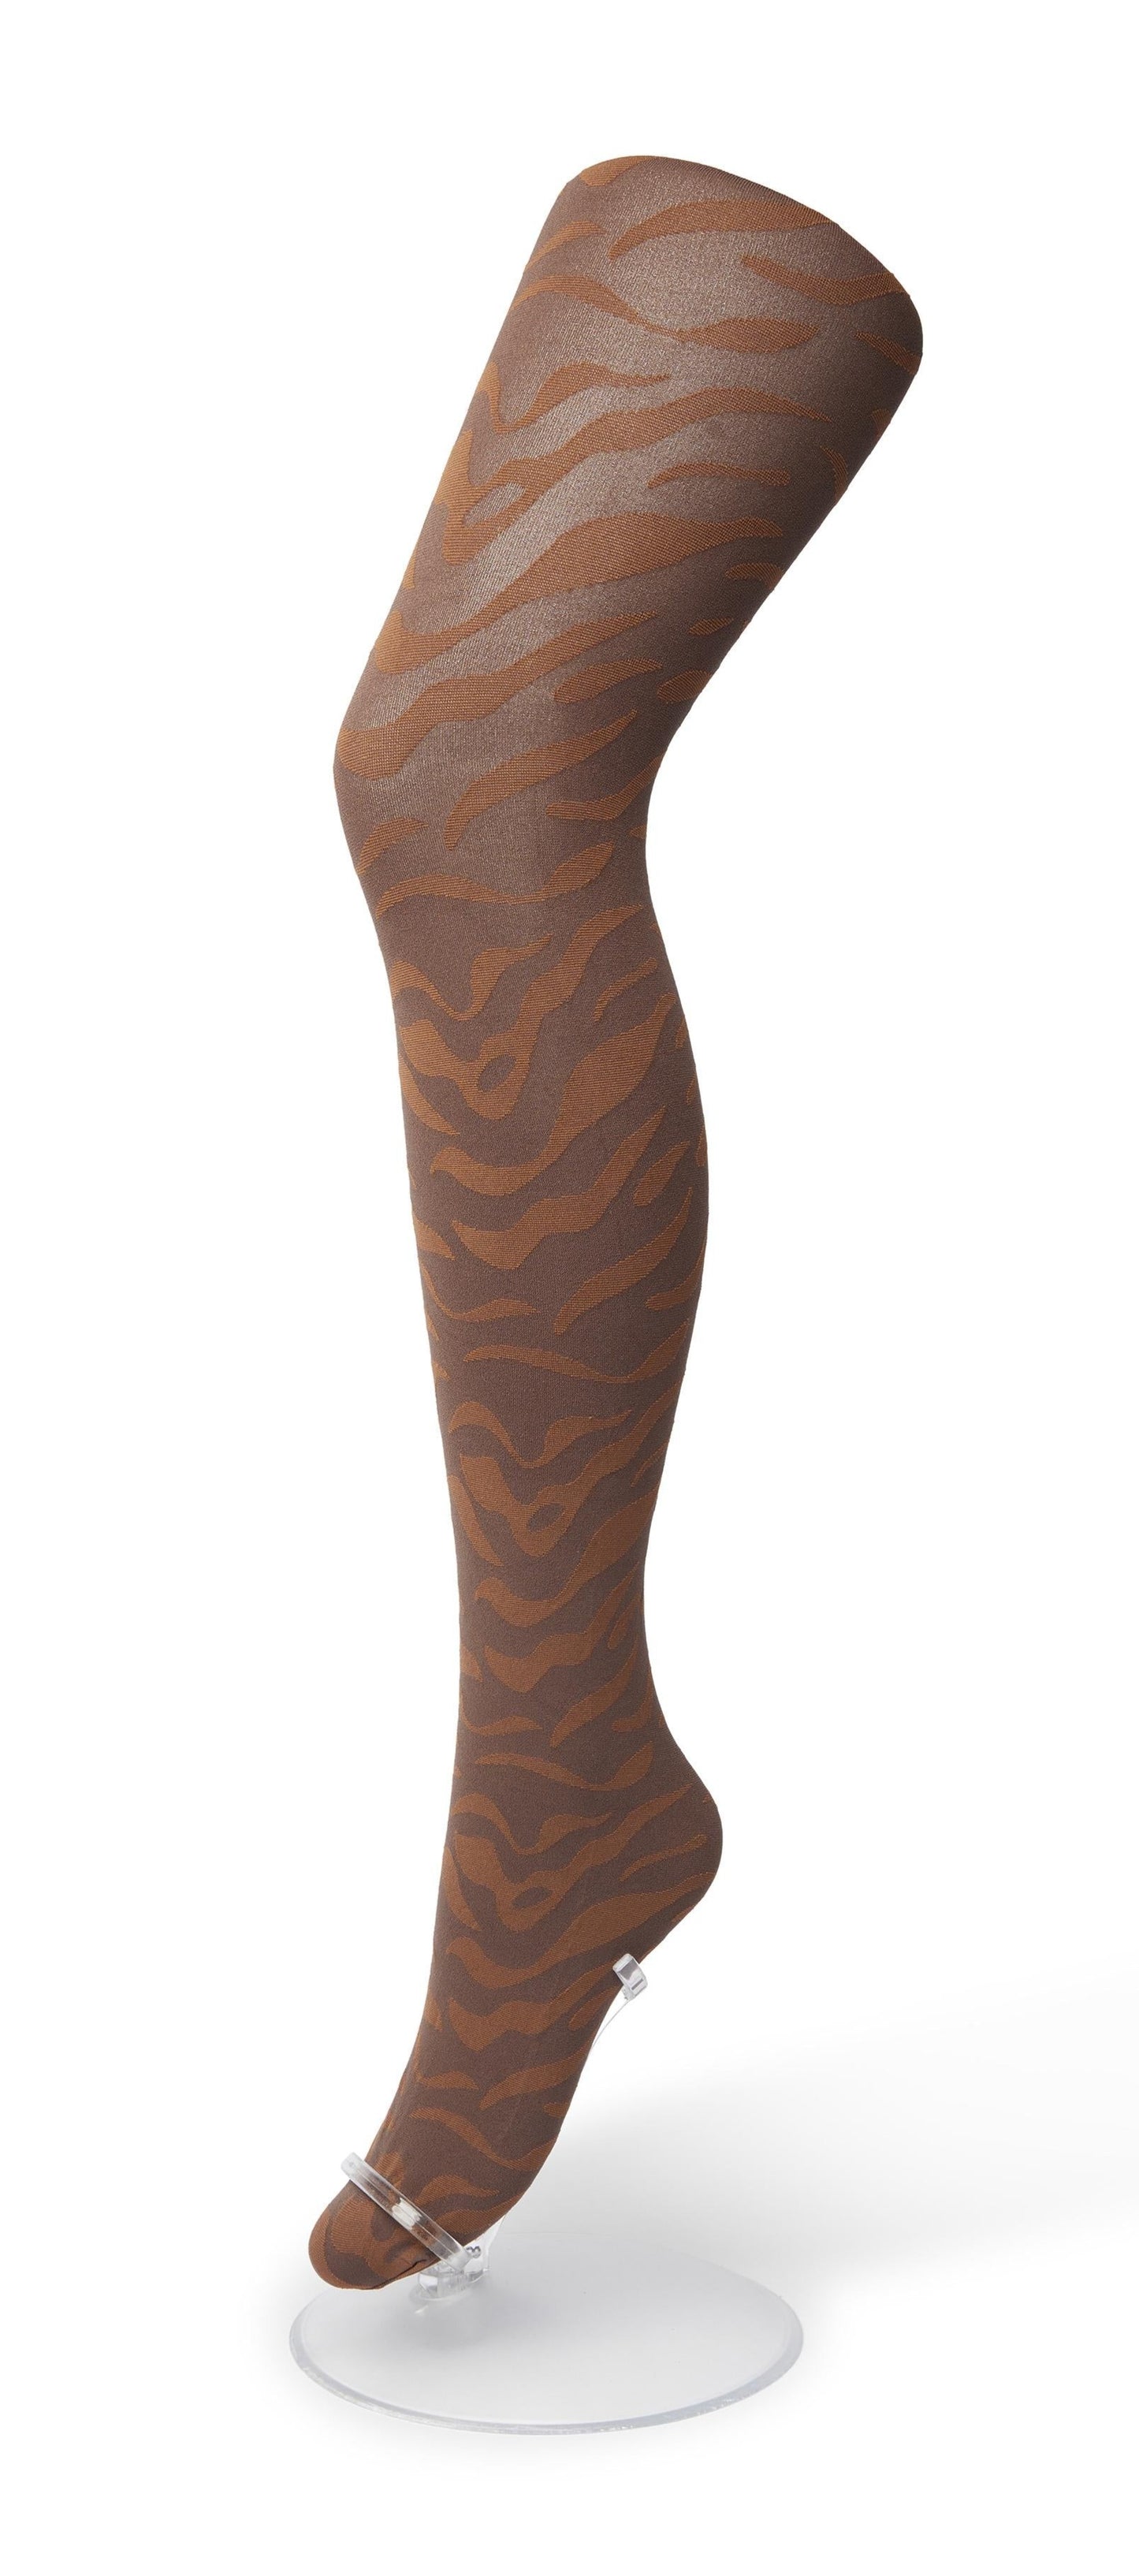 Bonnie Doon Zebra Tights - Ultra opaque brown fashion tights with a woven rust wavy style zebra pattern, flat seams and gusset.